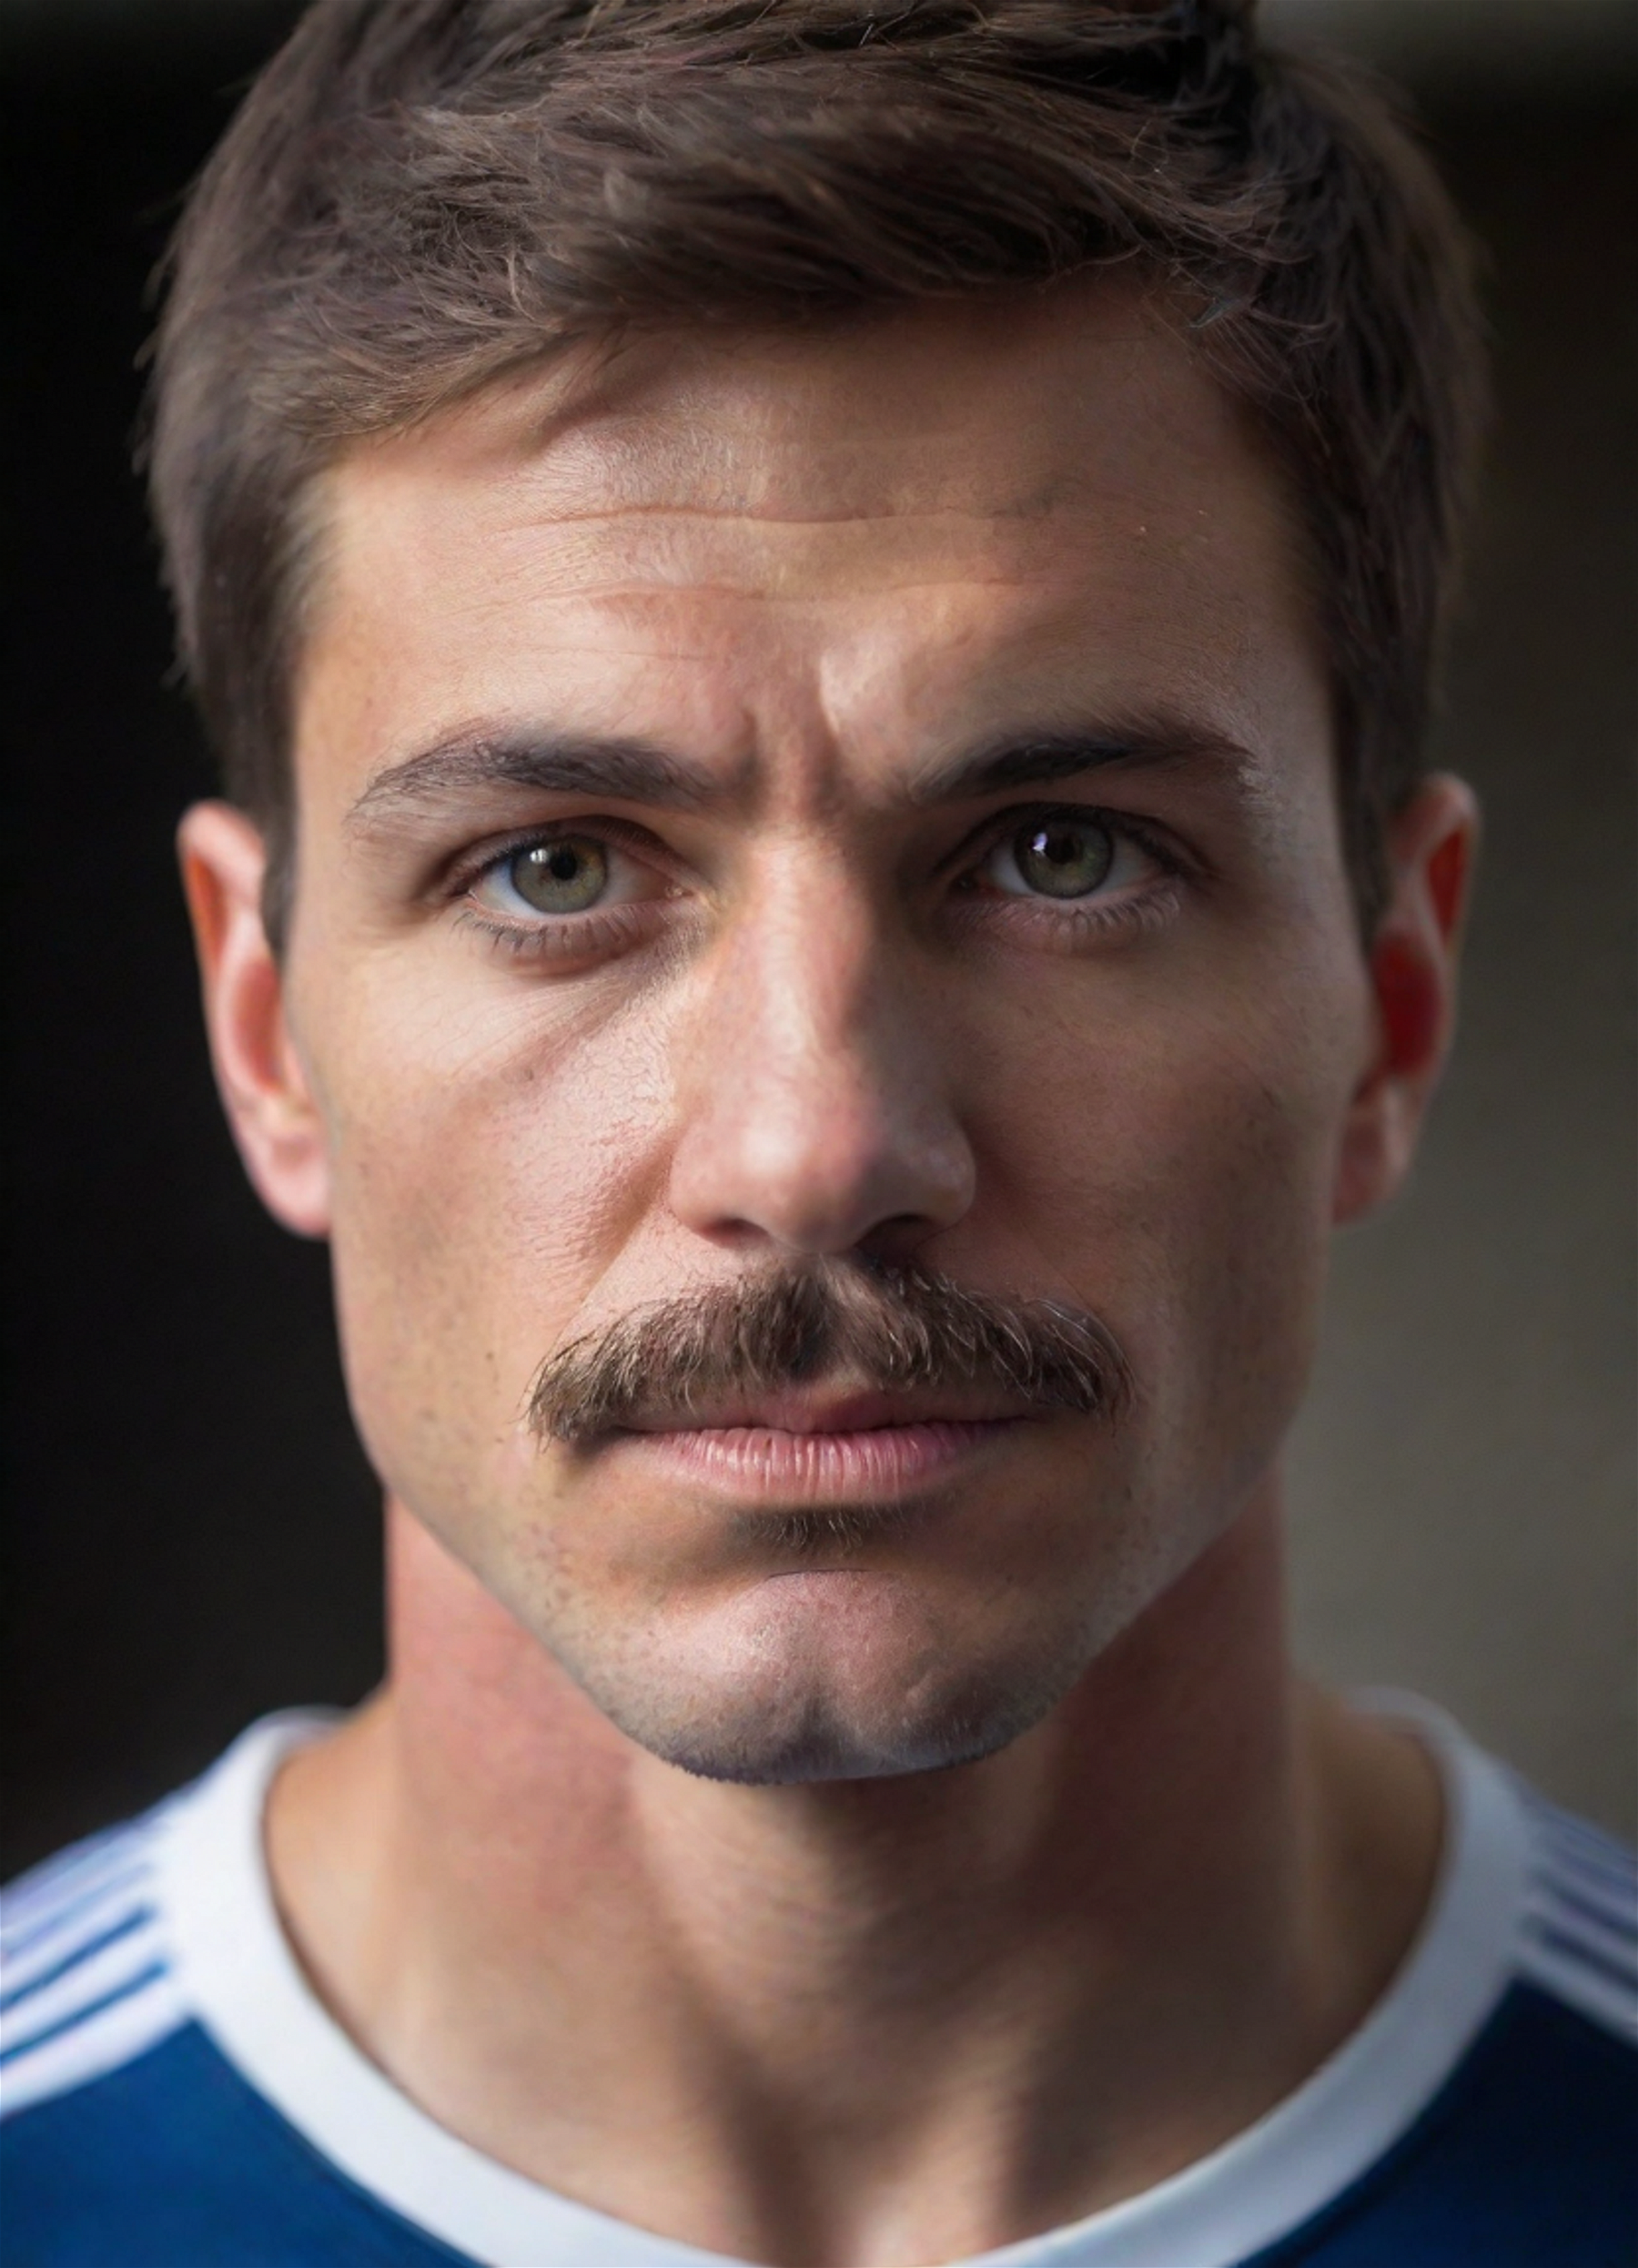 Close up portrait of an handsome male athlete, serious look, short hair and mustache